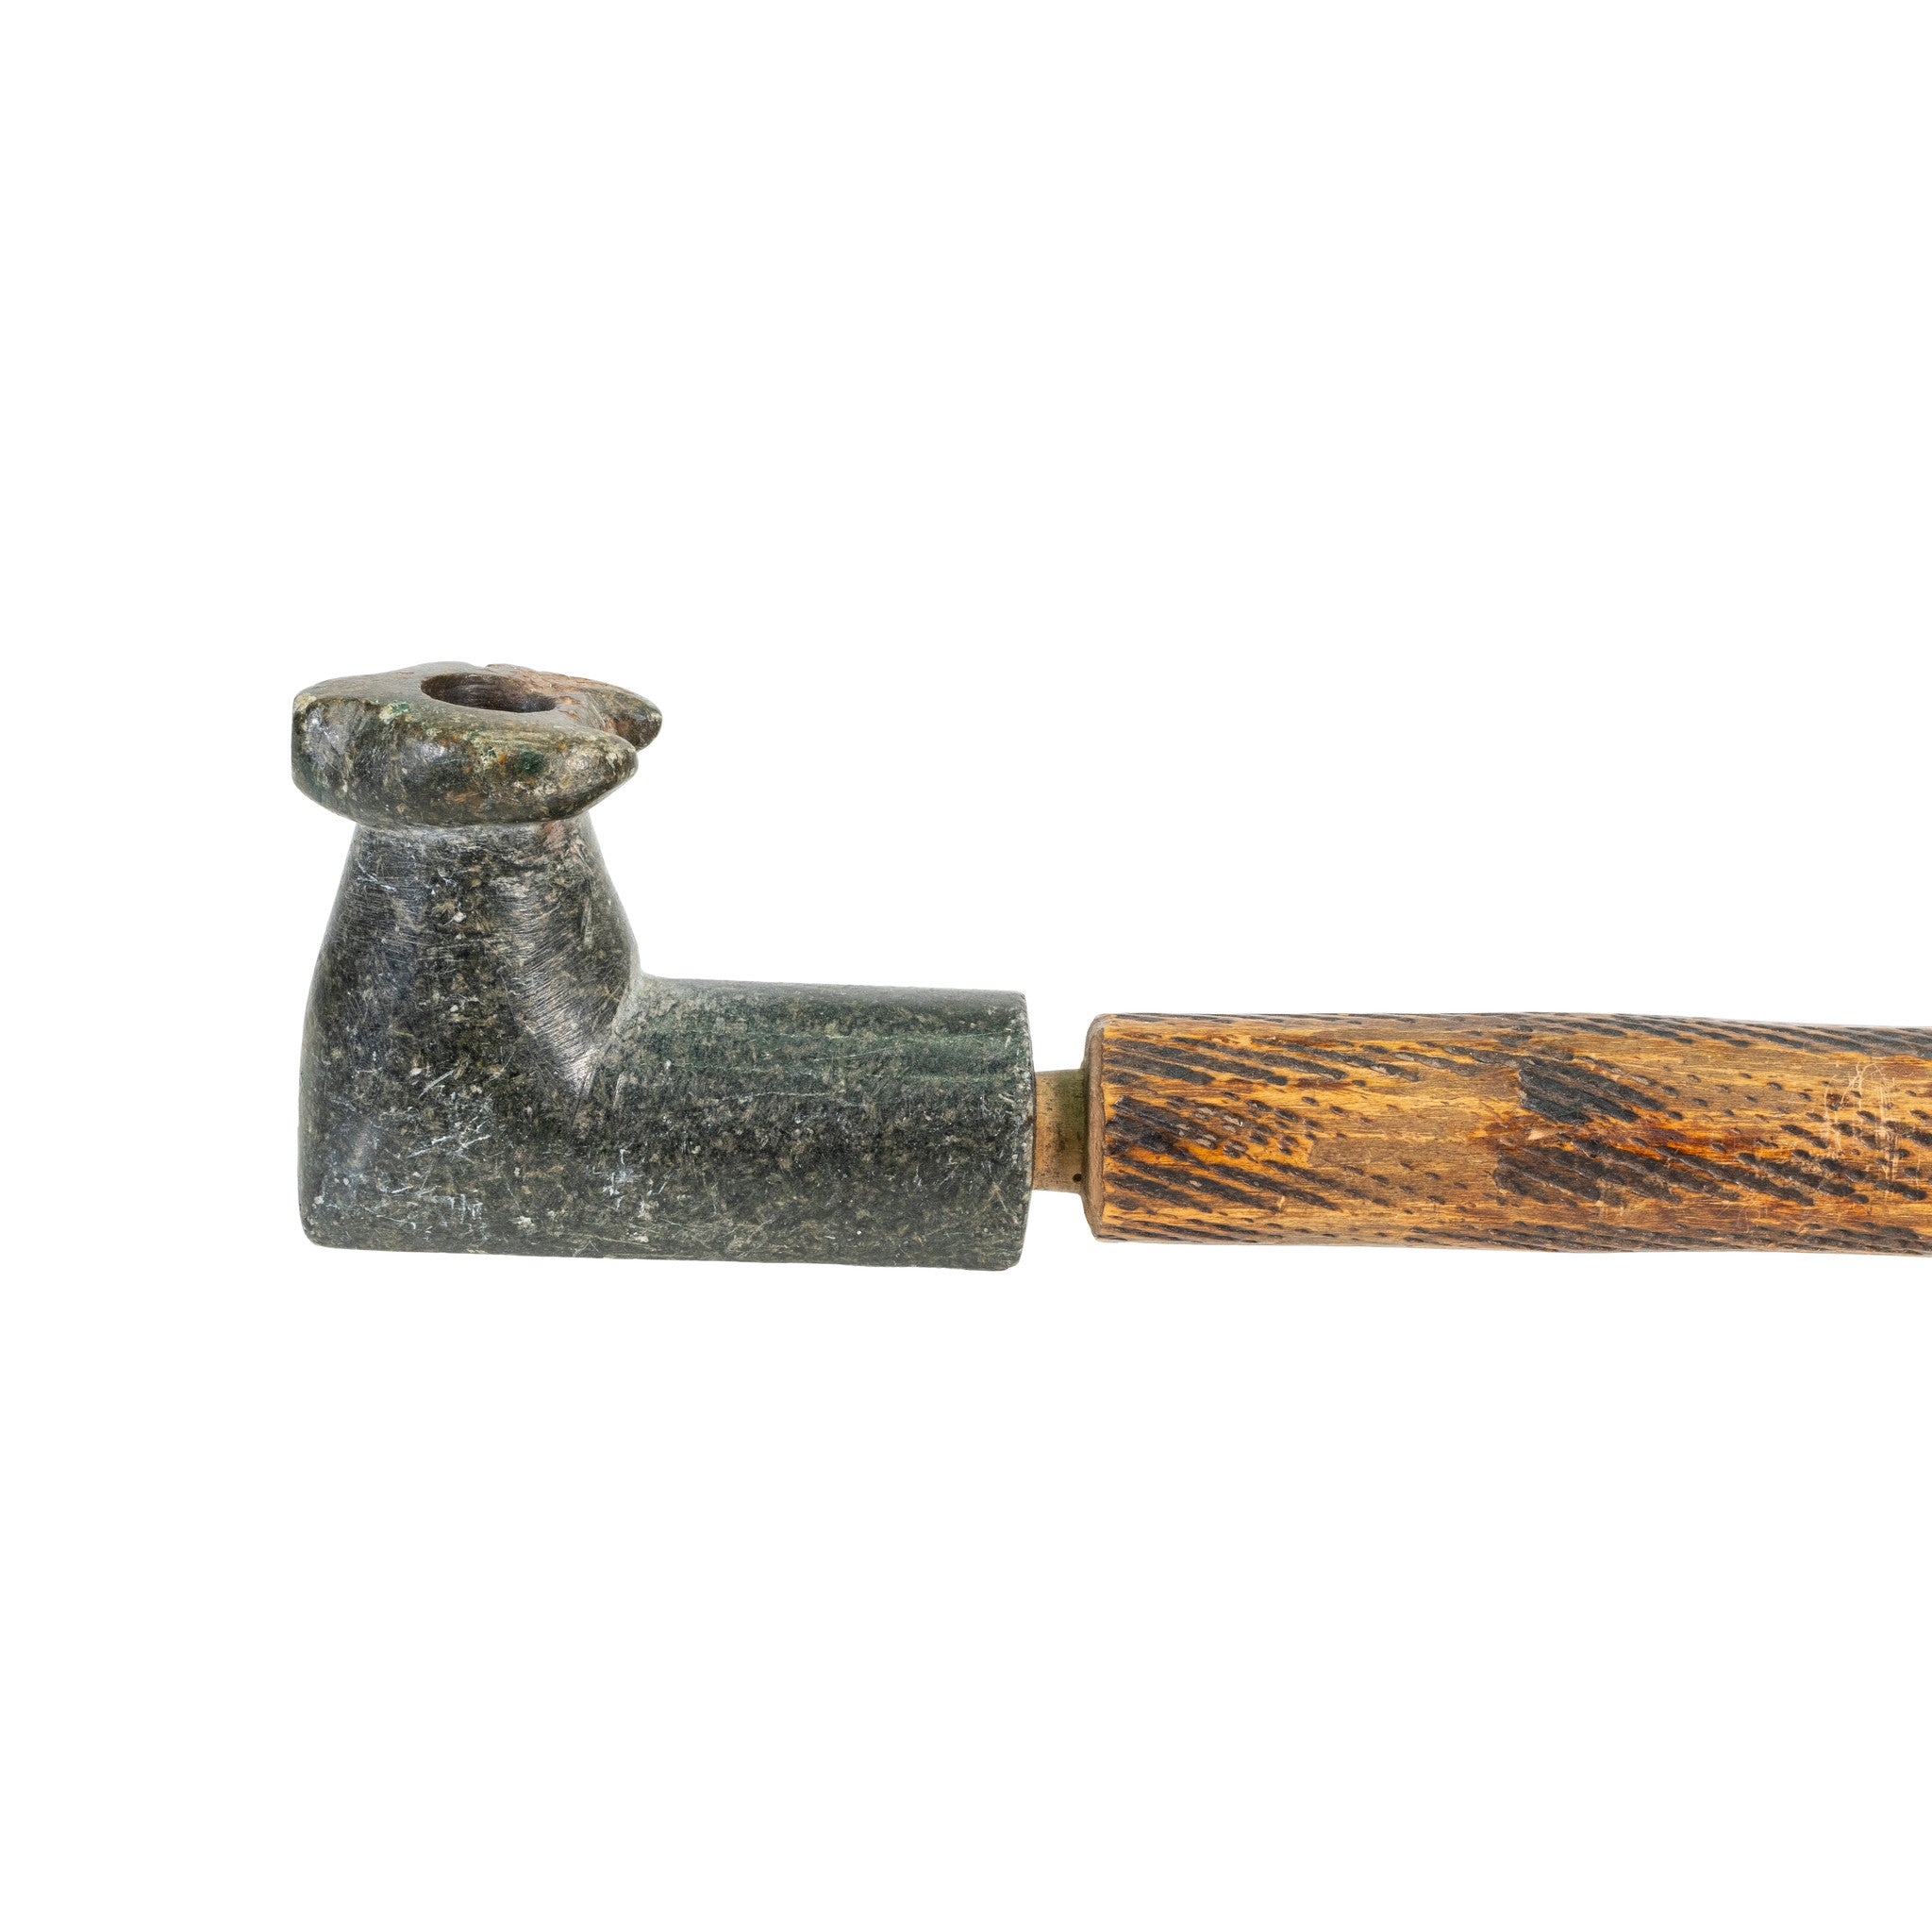 Sioux Effigy Pipe